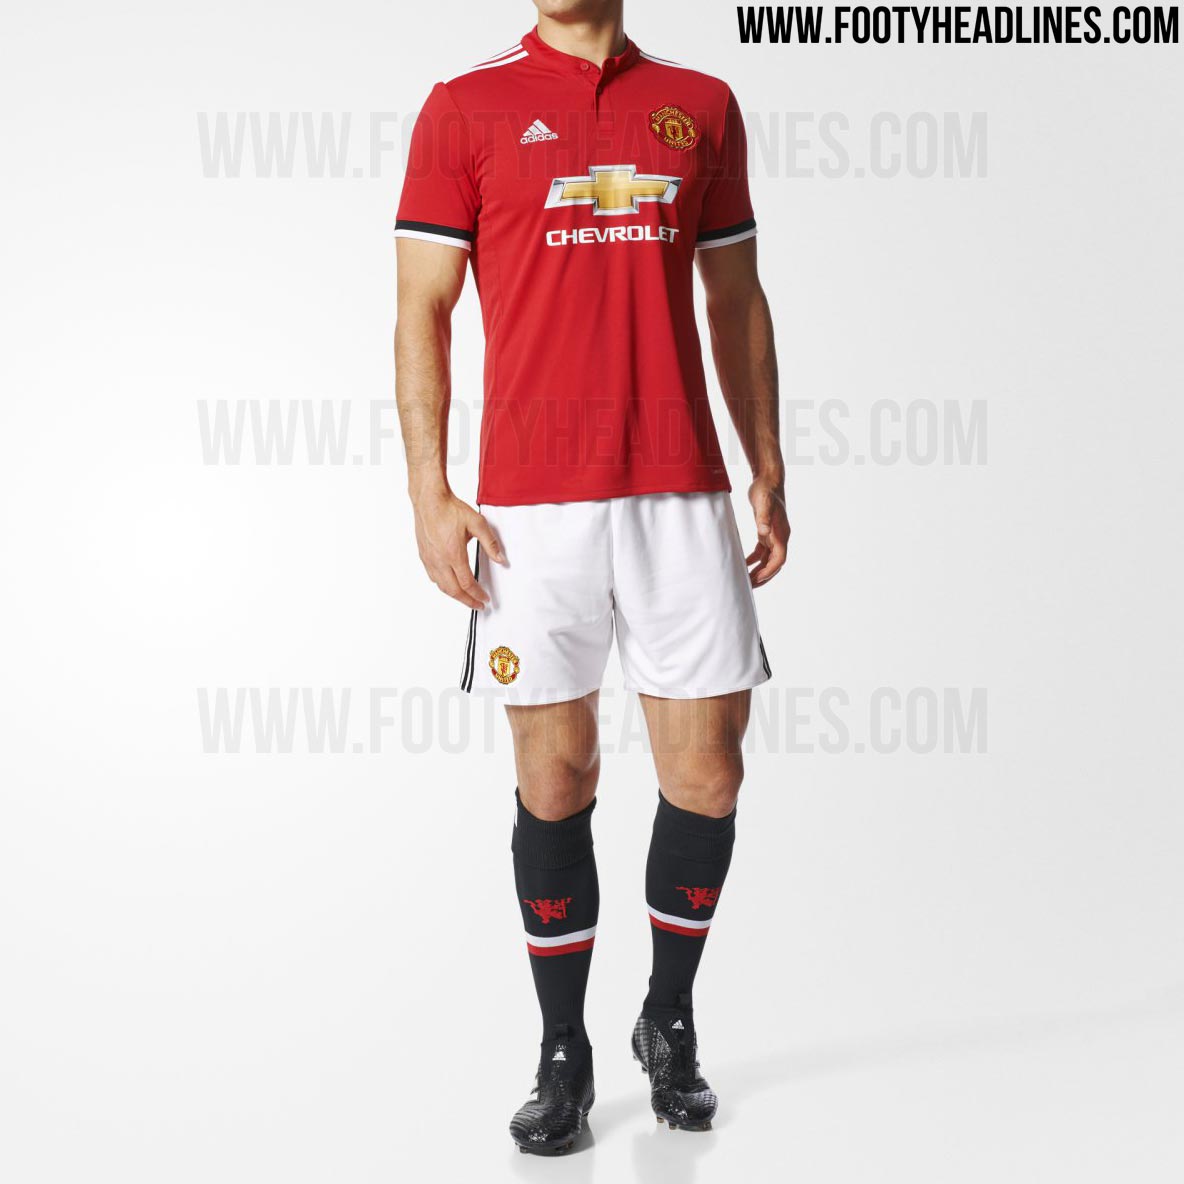 Manchester United 17-18 Home Kit Released - Footy Headlines